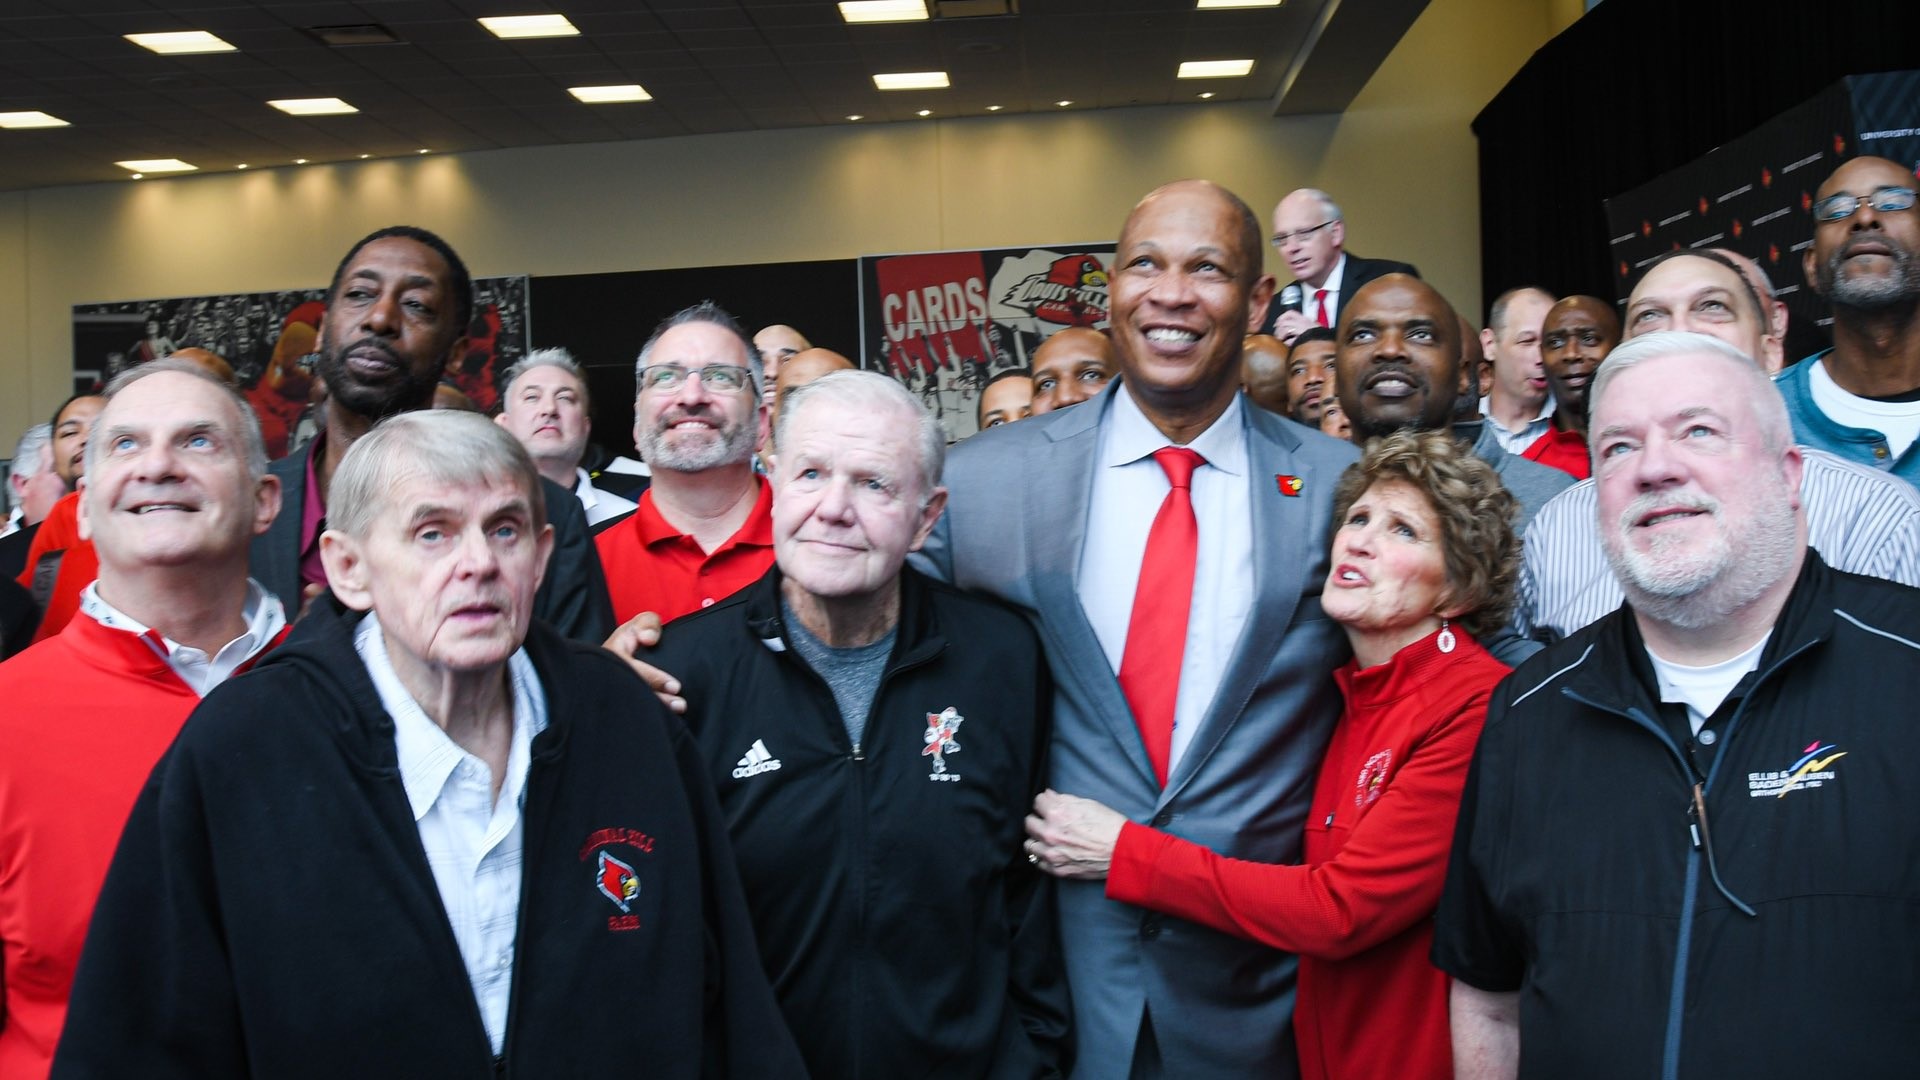 Coach Kenny Payne also recognizes he may be one of the few people universally liked in the UofL-UK rivalry.